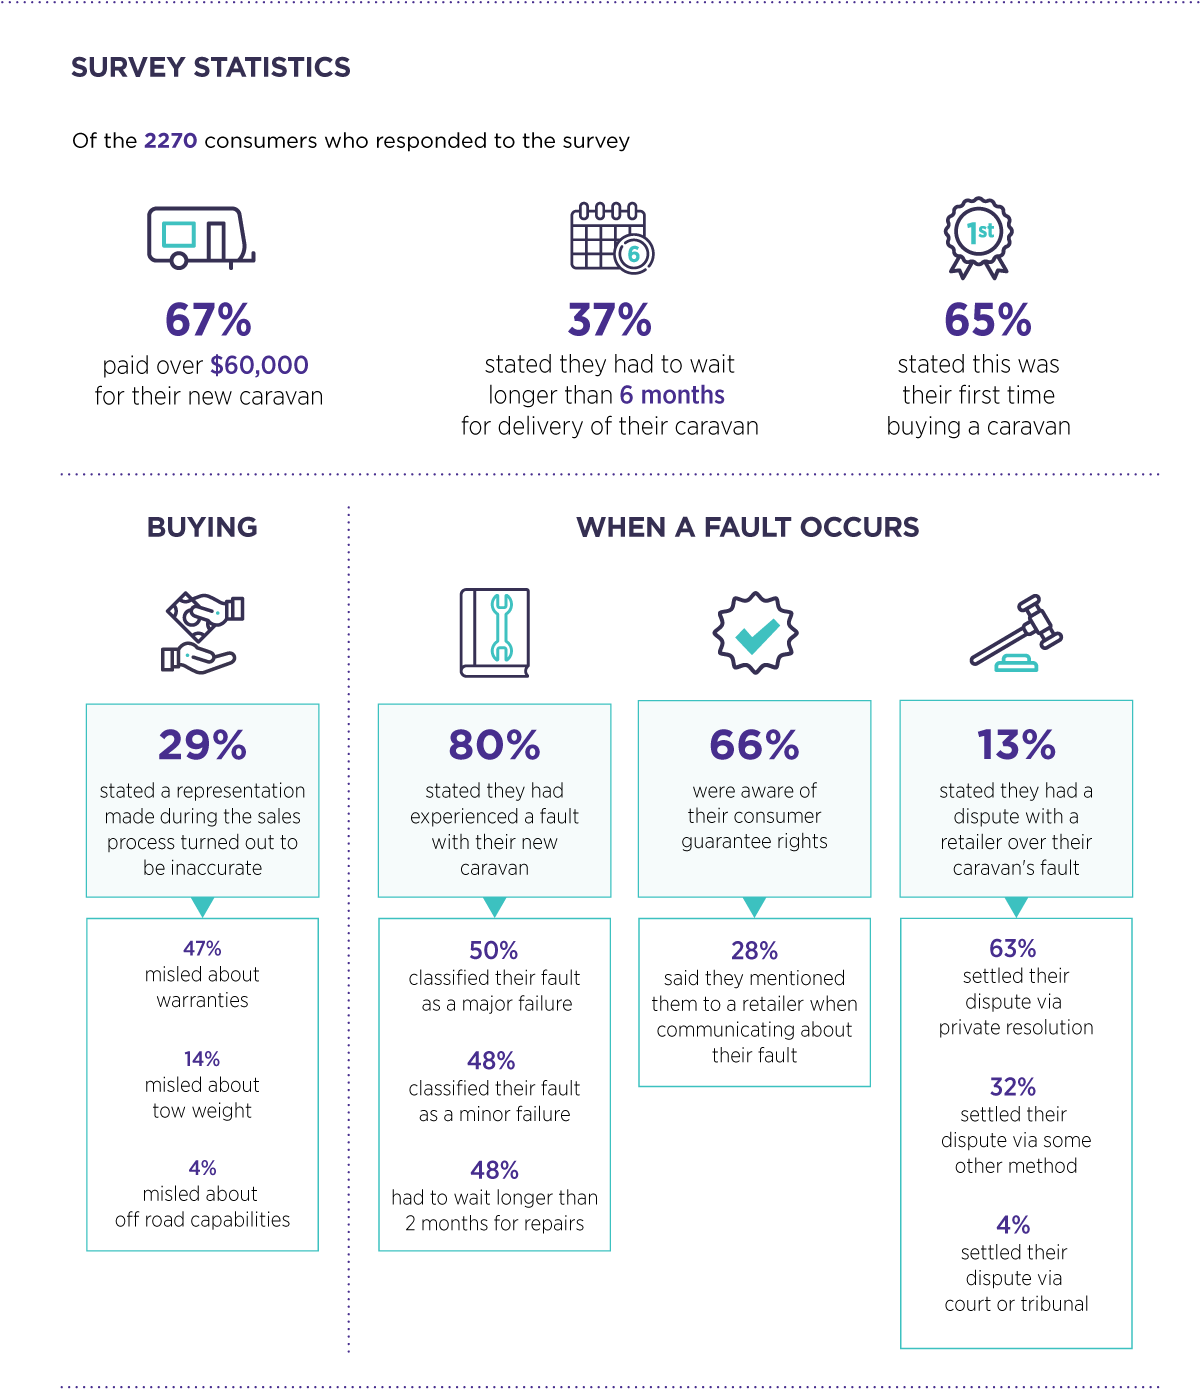 An infographic of the survey statistics from the caravan report of the 2,270 consumers who responded.